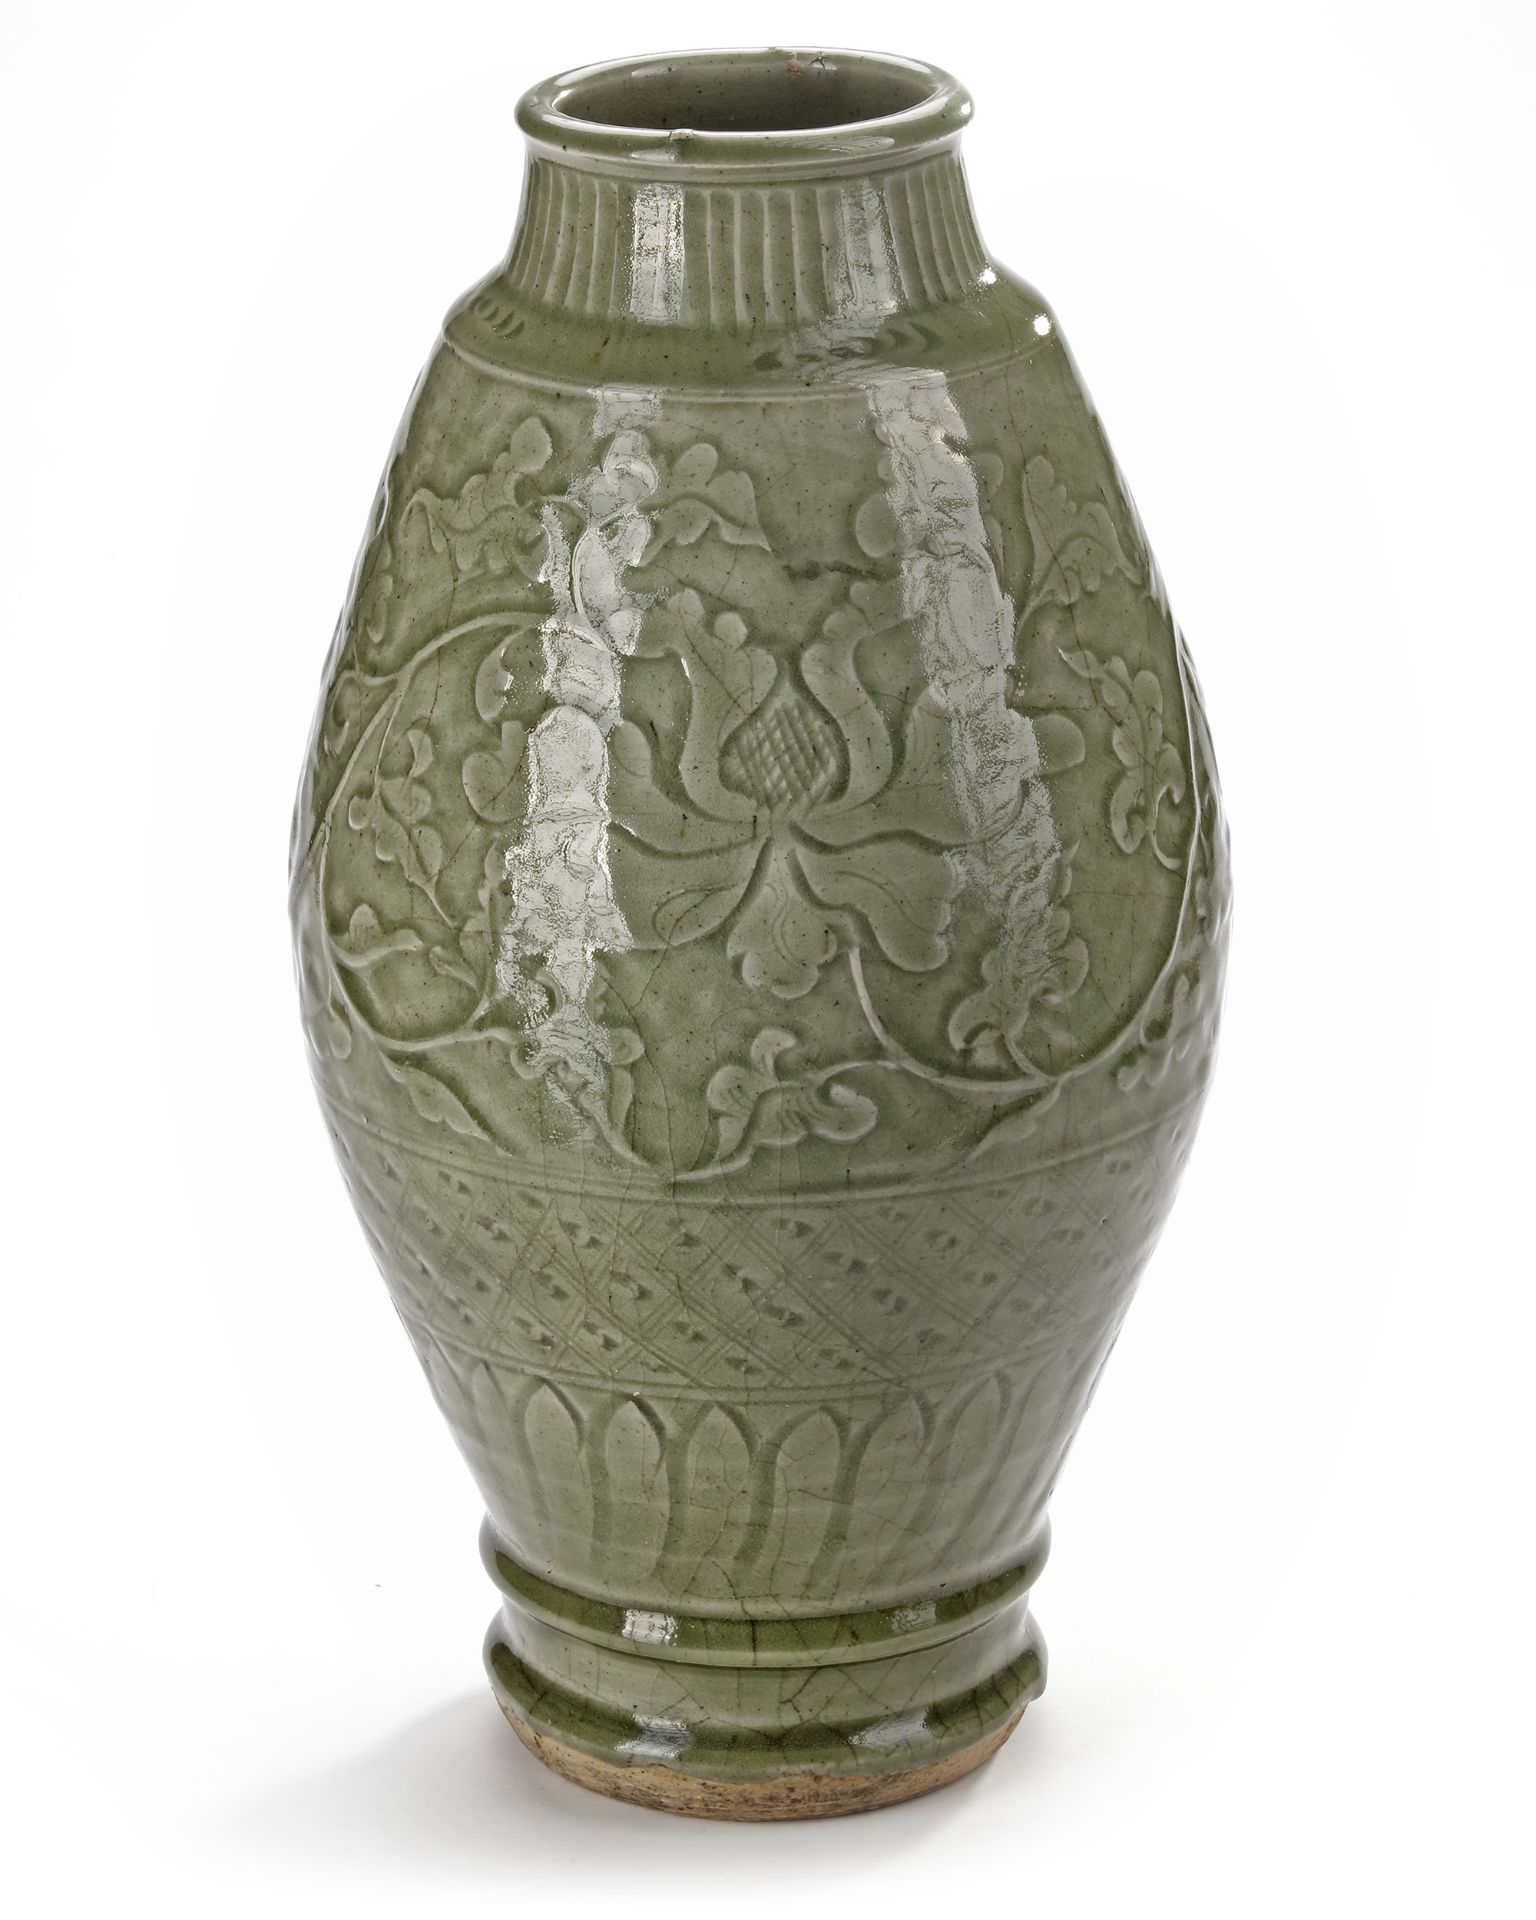 A LARGE CHINESE LONGQUAN CELADON VASE, MING DYNASTY (1368-1644) - Image 2 of 5